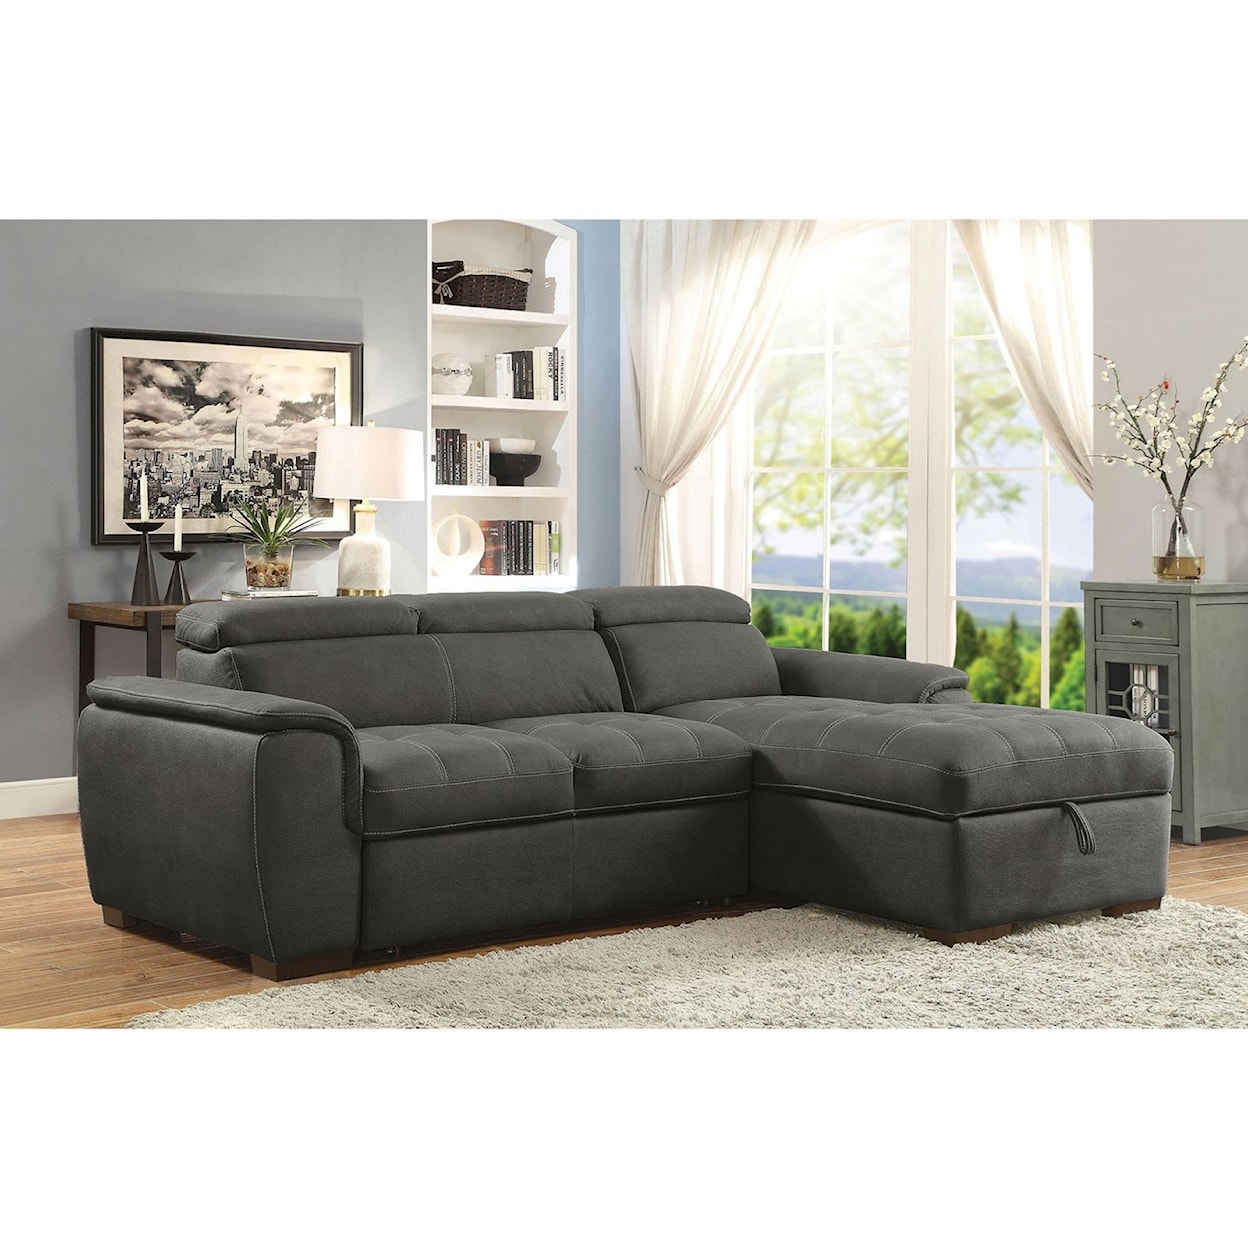 Furniture of America Patty Sofa Sectional